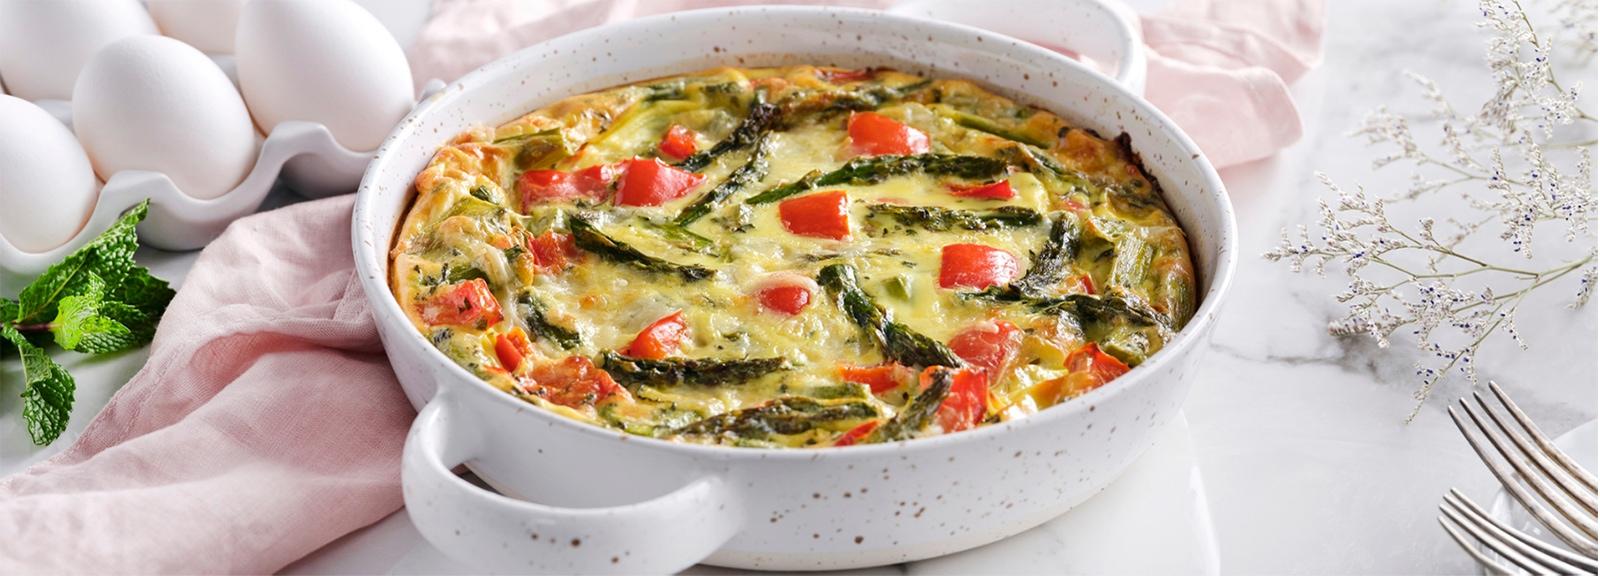 Roasted Asparagus and Pepper Crustless Quiche